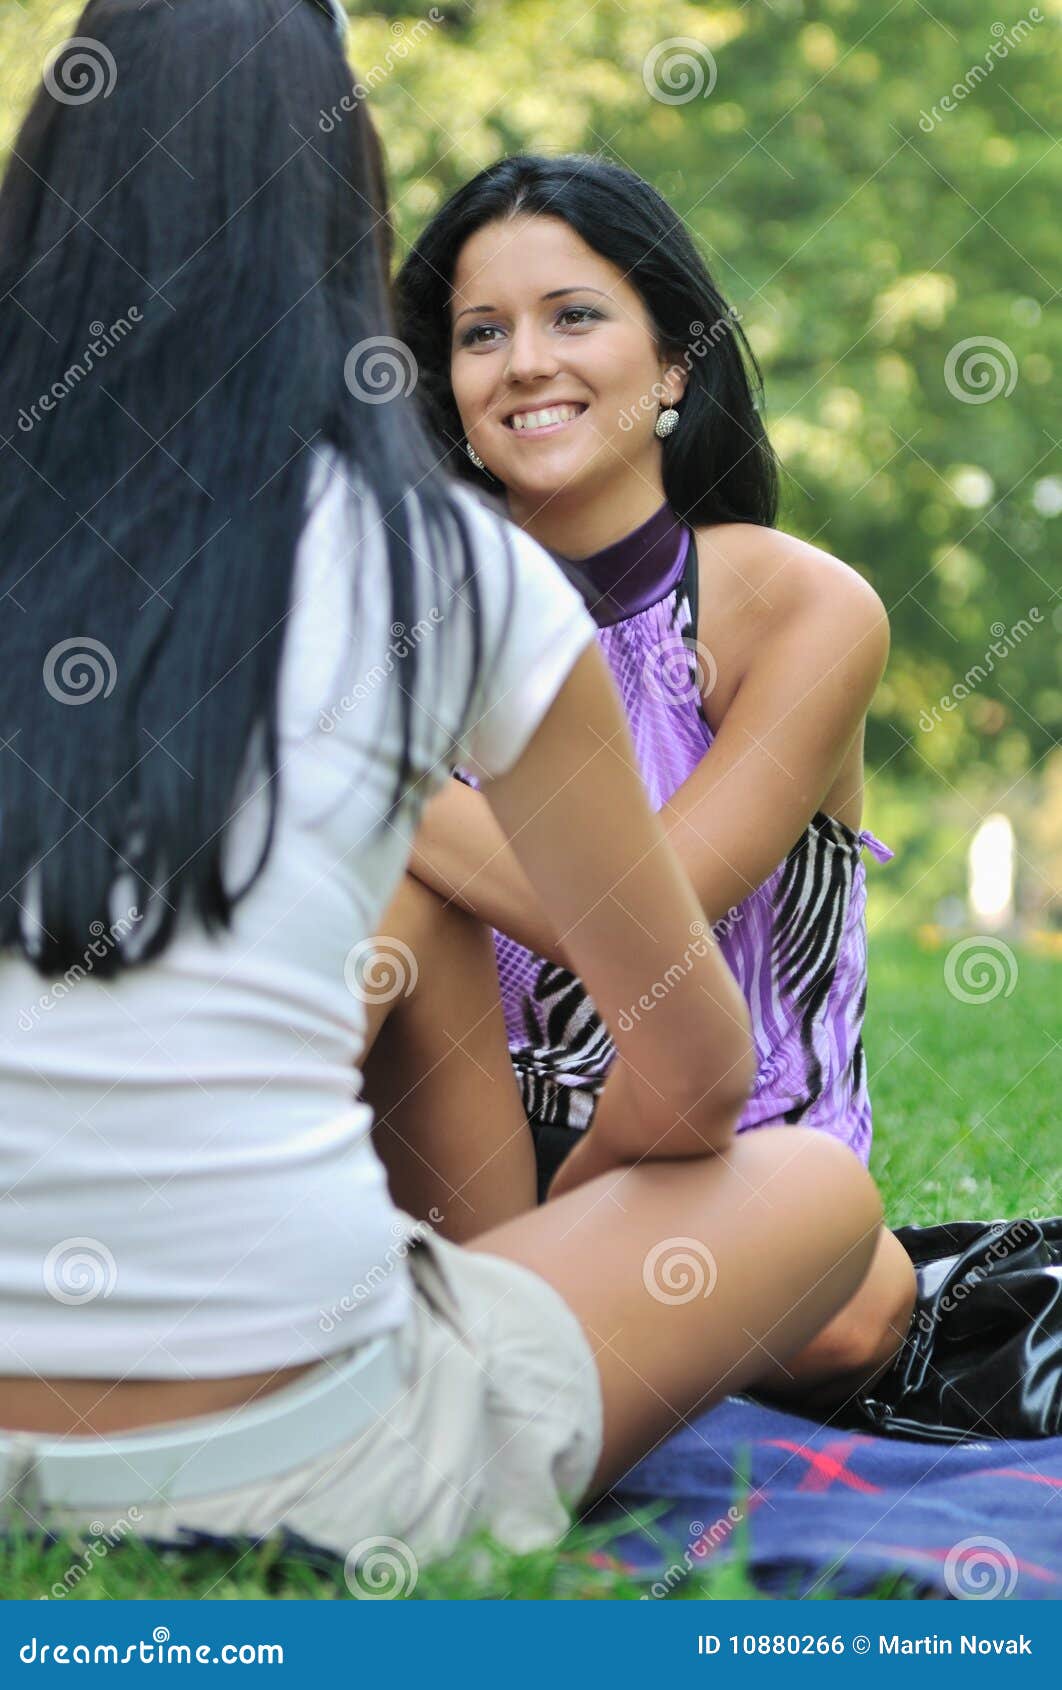 Two Friends Girls Talking Outside In Park Stock Photo Image Of Cute